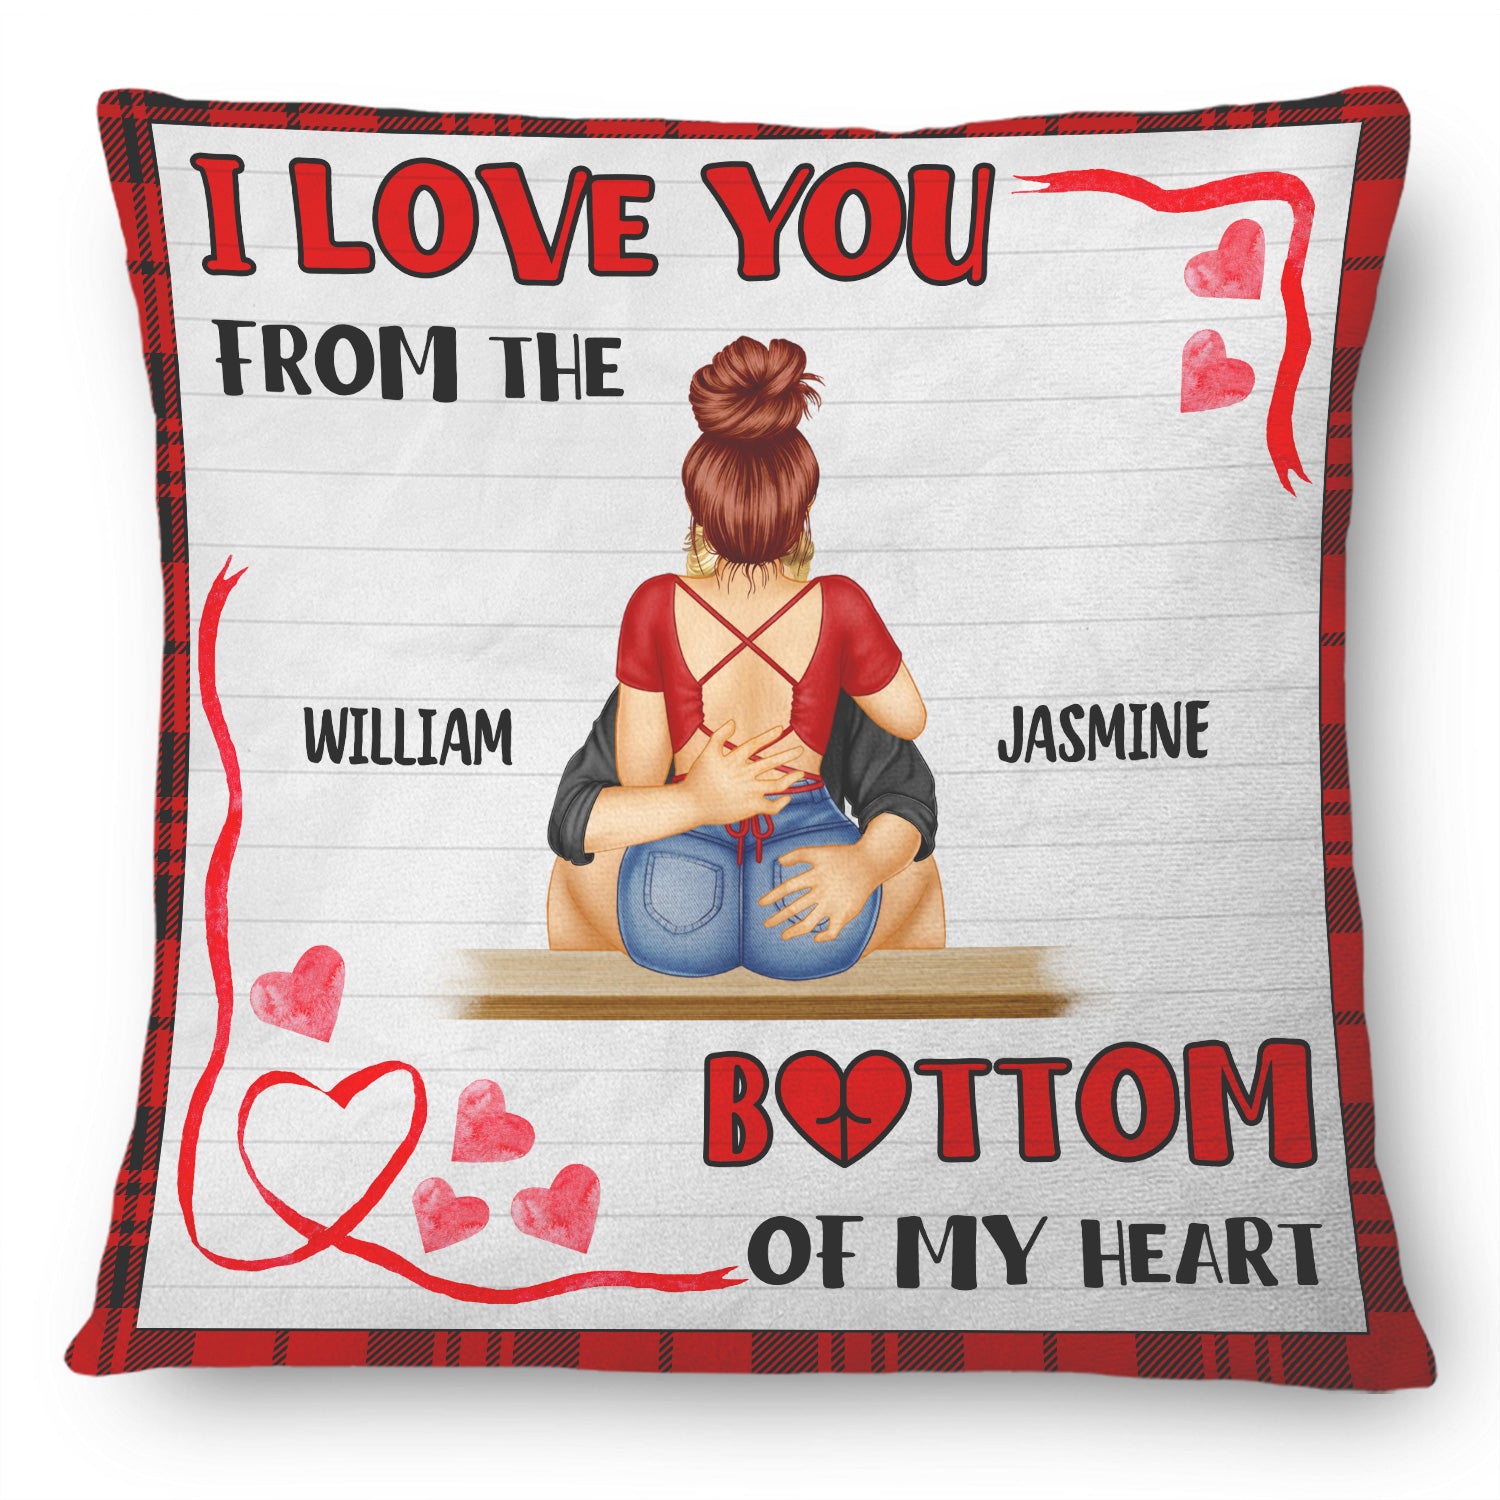 Bottom Of My Heart - Gift For Couples - Personalized Pillow